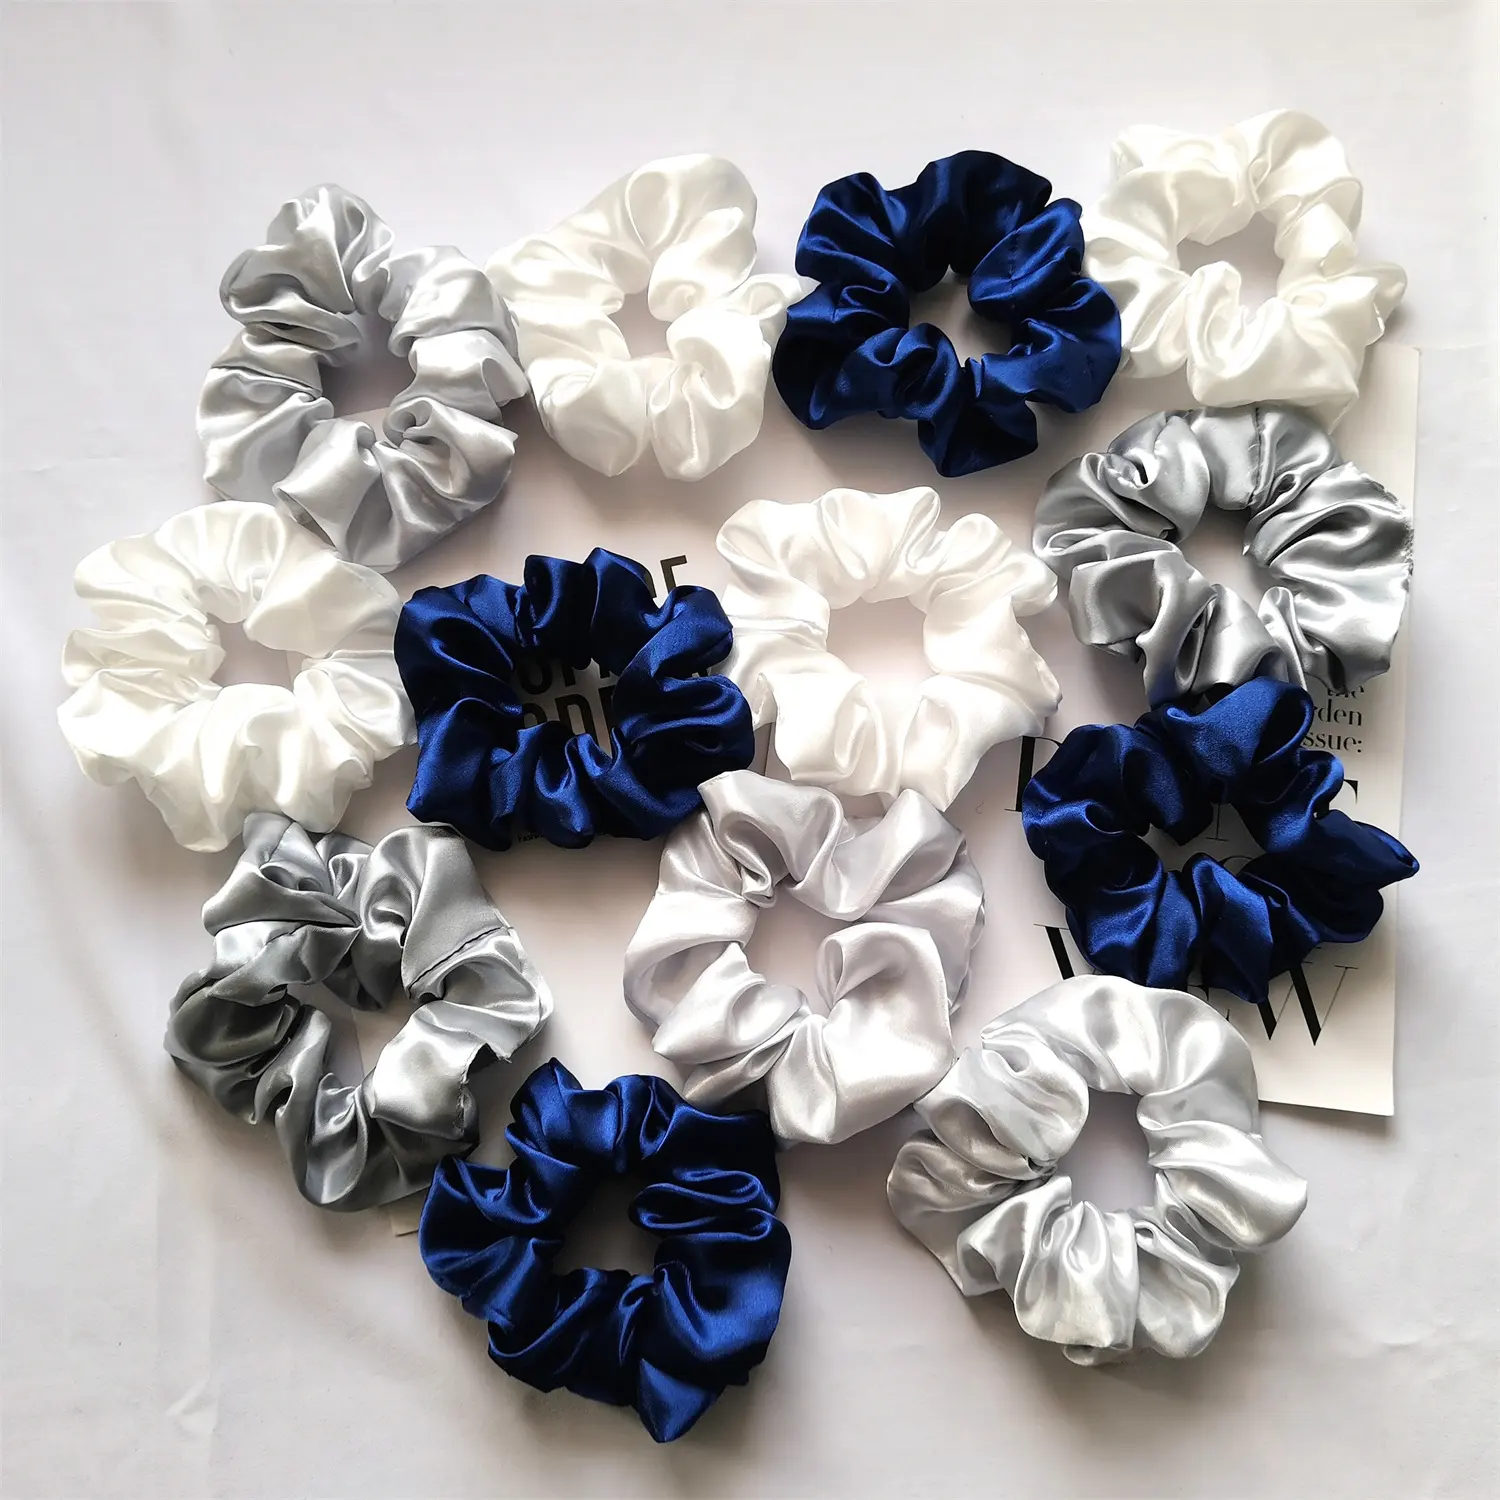 2023 Wholesale Women Elastic Rubber Bands Ponytail Holders Scrunchies Accessory Custom Satin Scrunchies For Hair